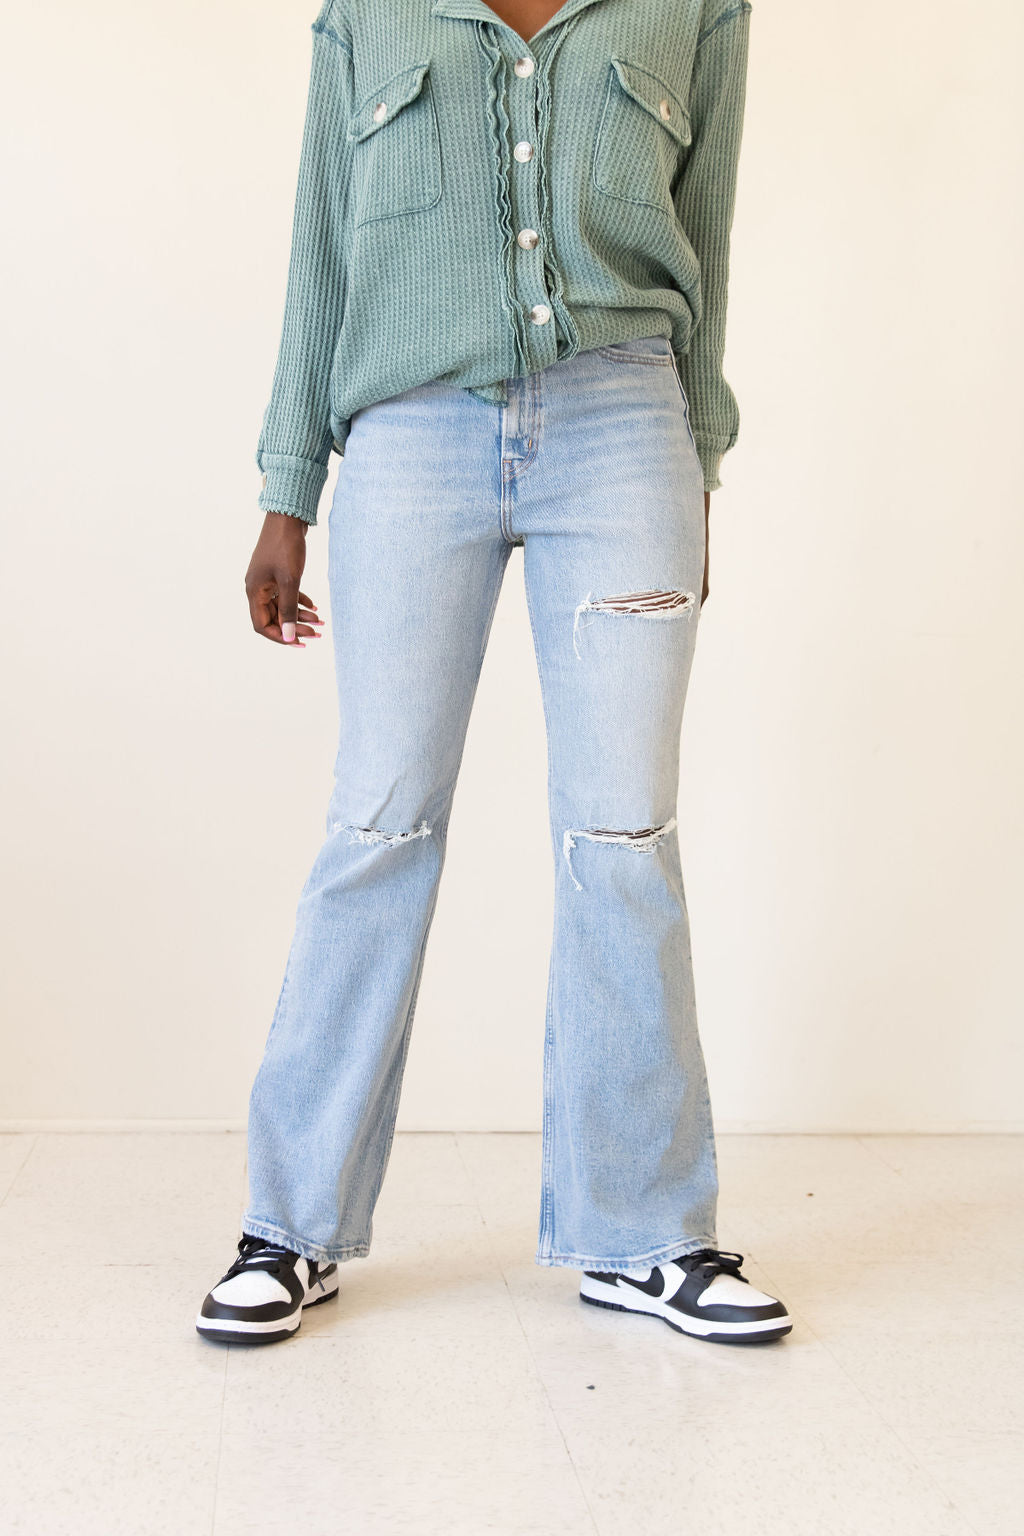 Low Rise 90s Relaxed Jeans by Nectar Premium Denim